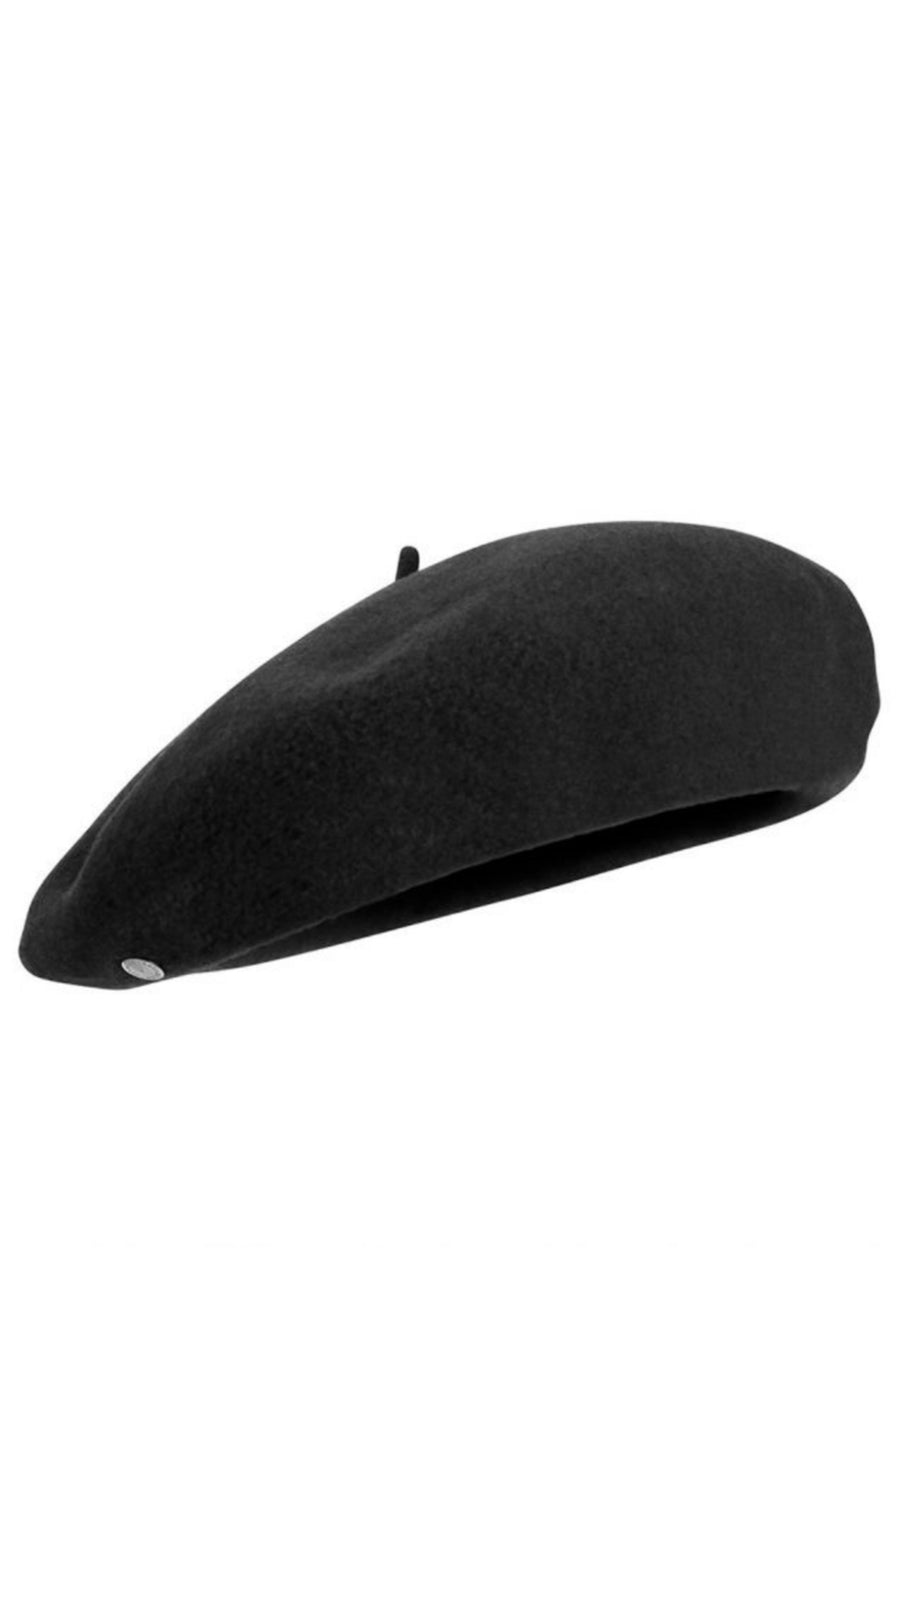 THE FRENCH BERET | Black